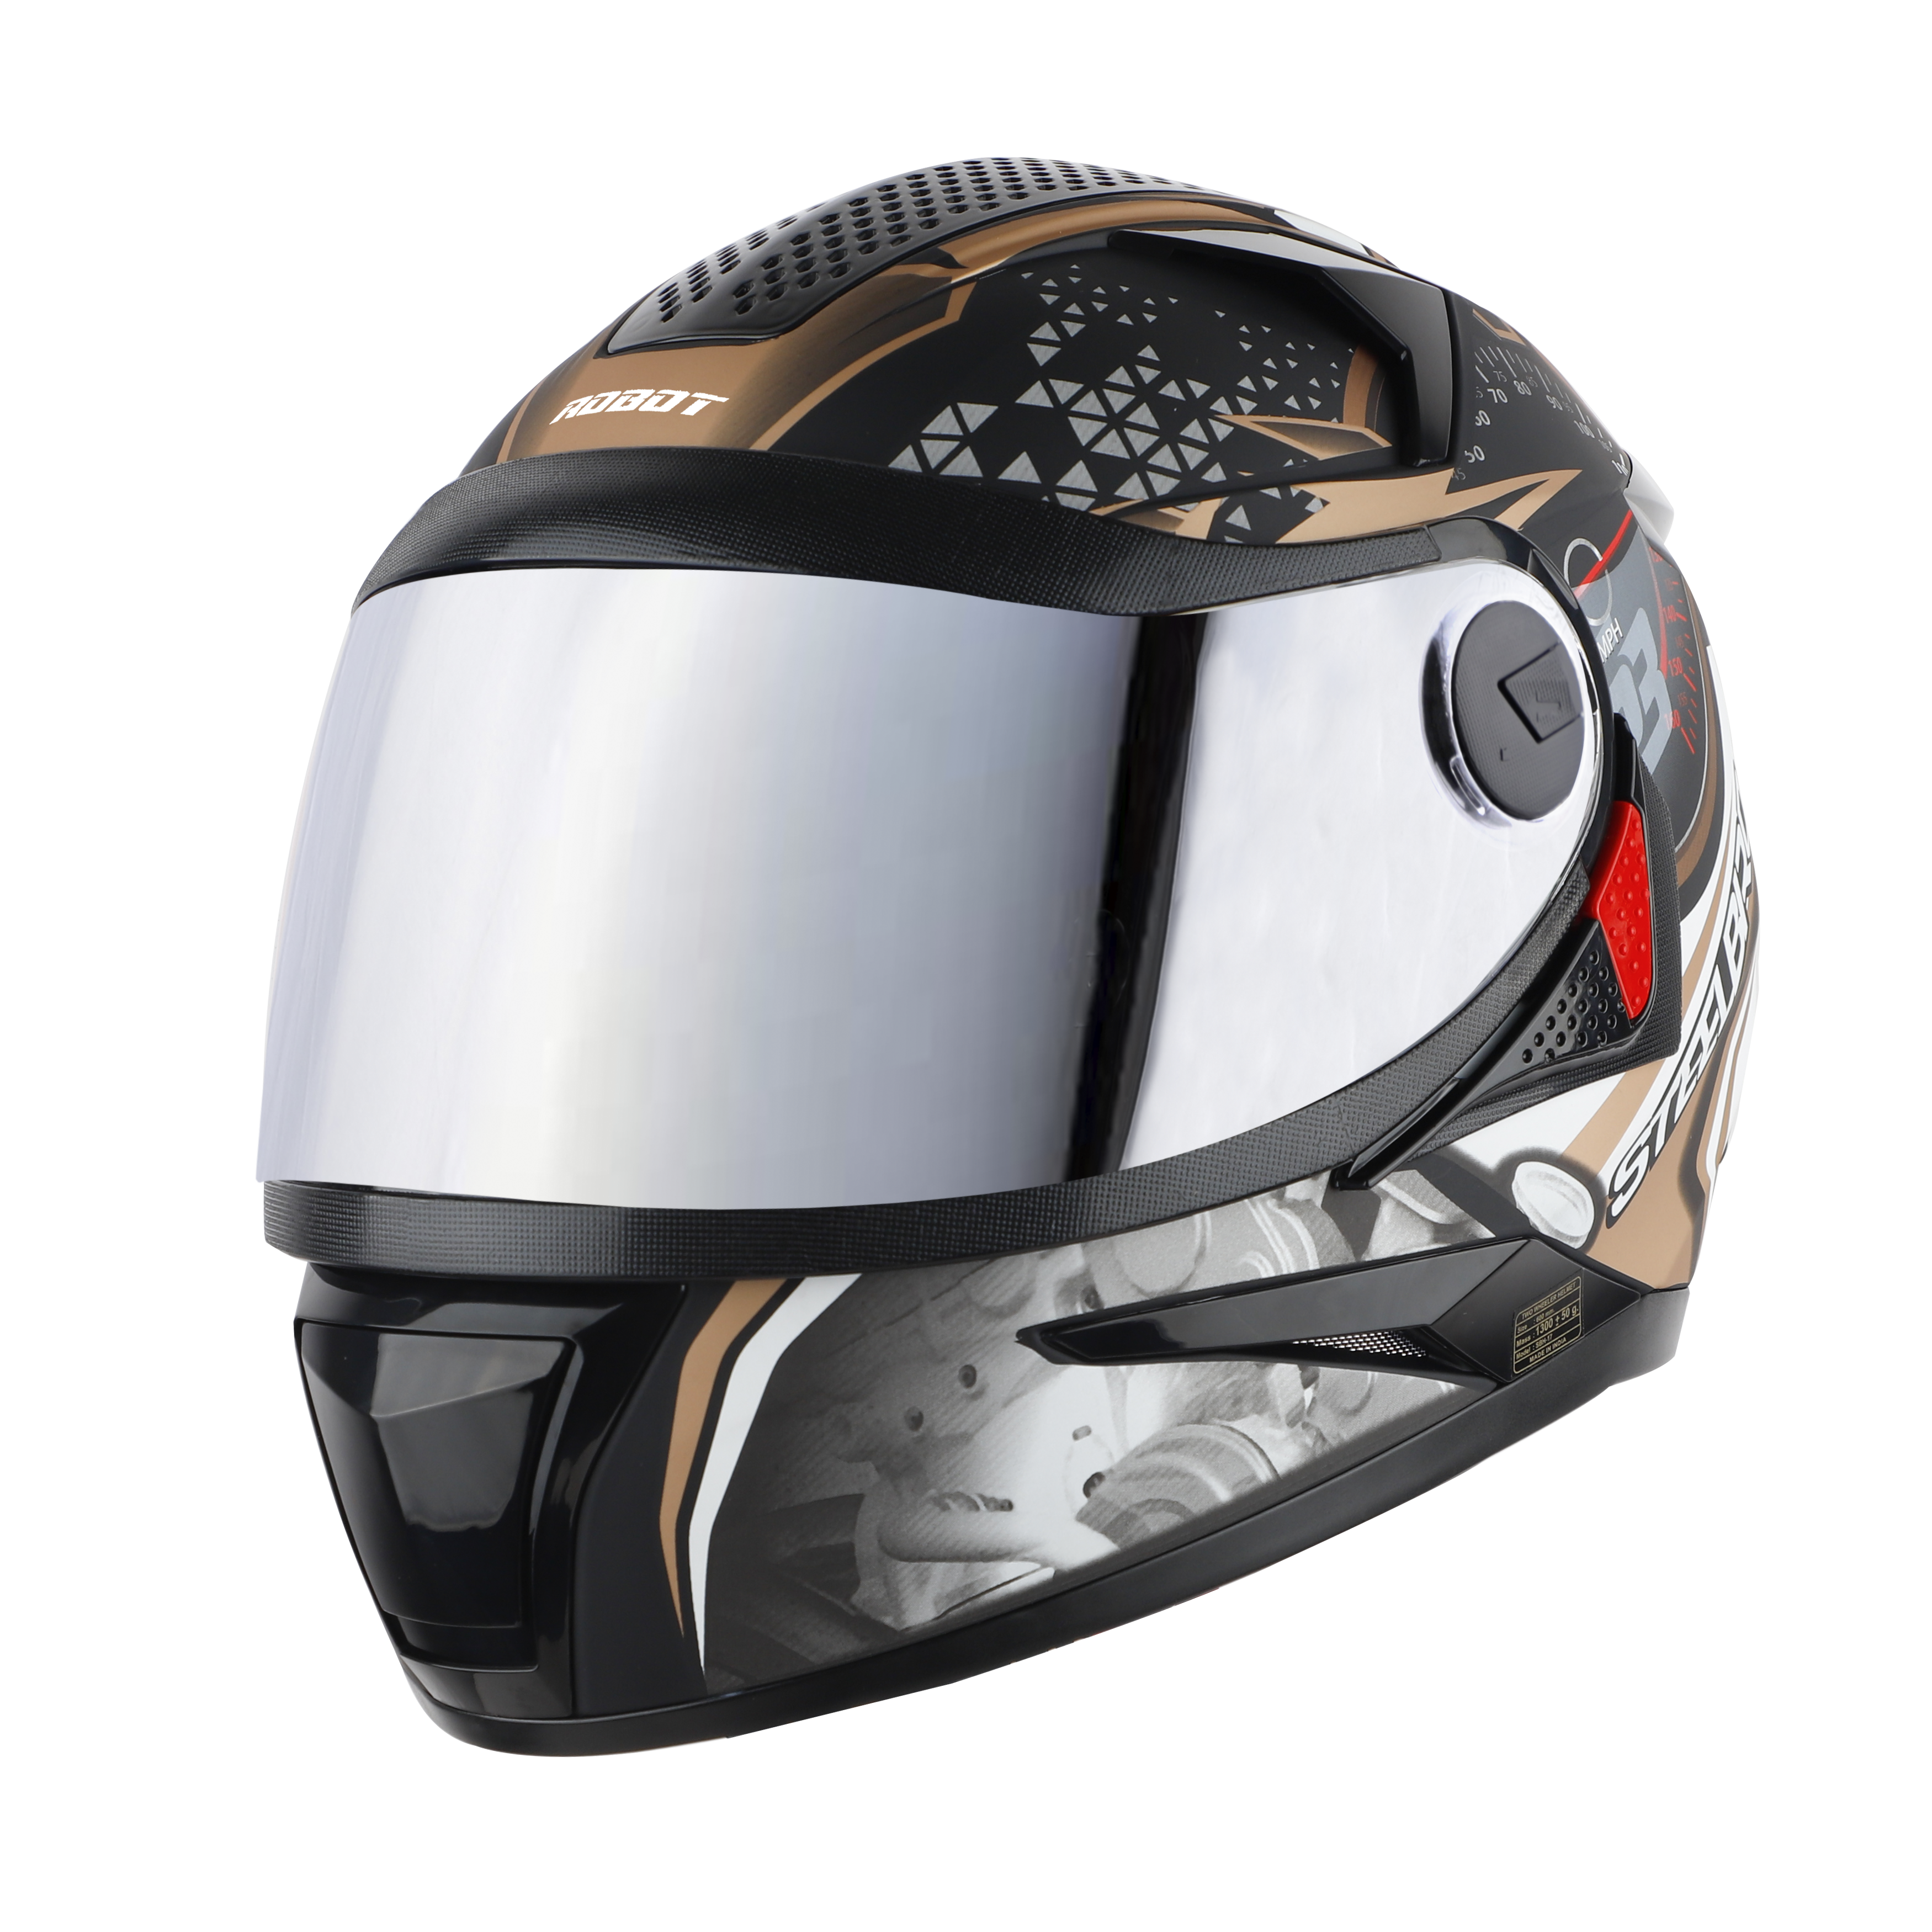 Steelbird SBH-17 Ignimeter Full Face ISI Certified Graphic Helmet (Glossy Black Gold With Chrome Silver Visor)